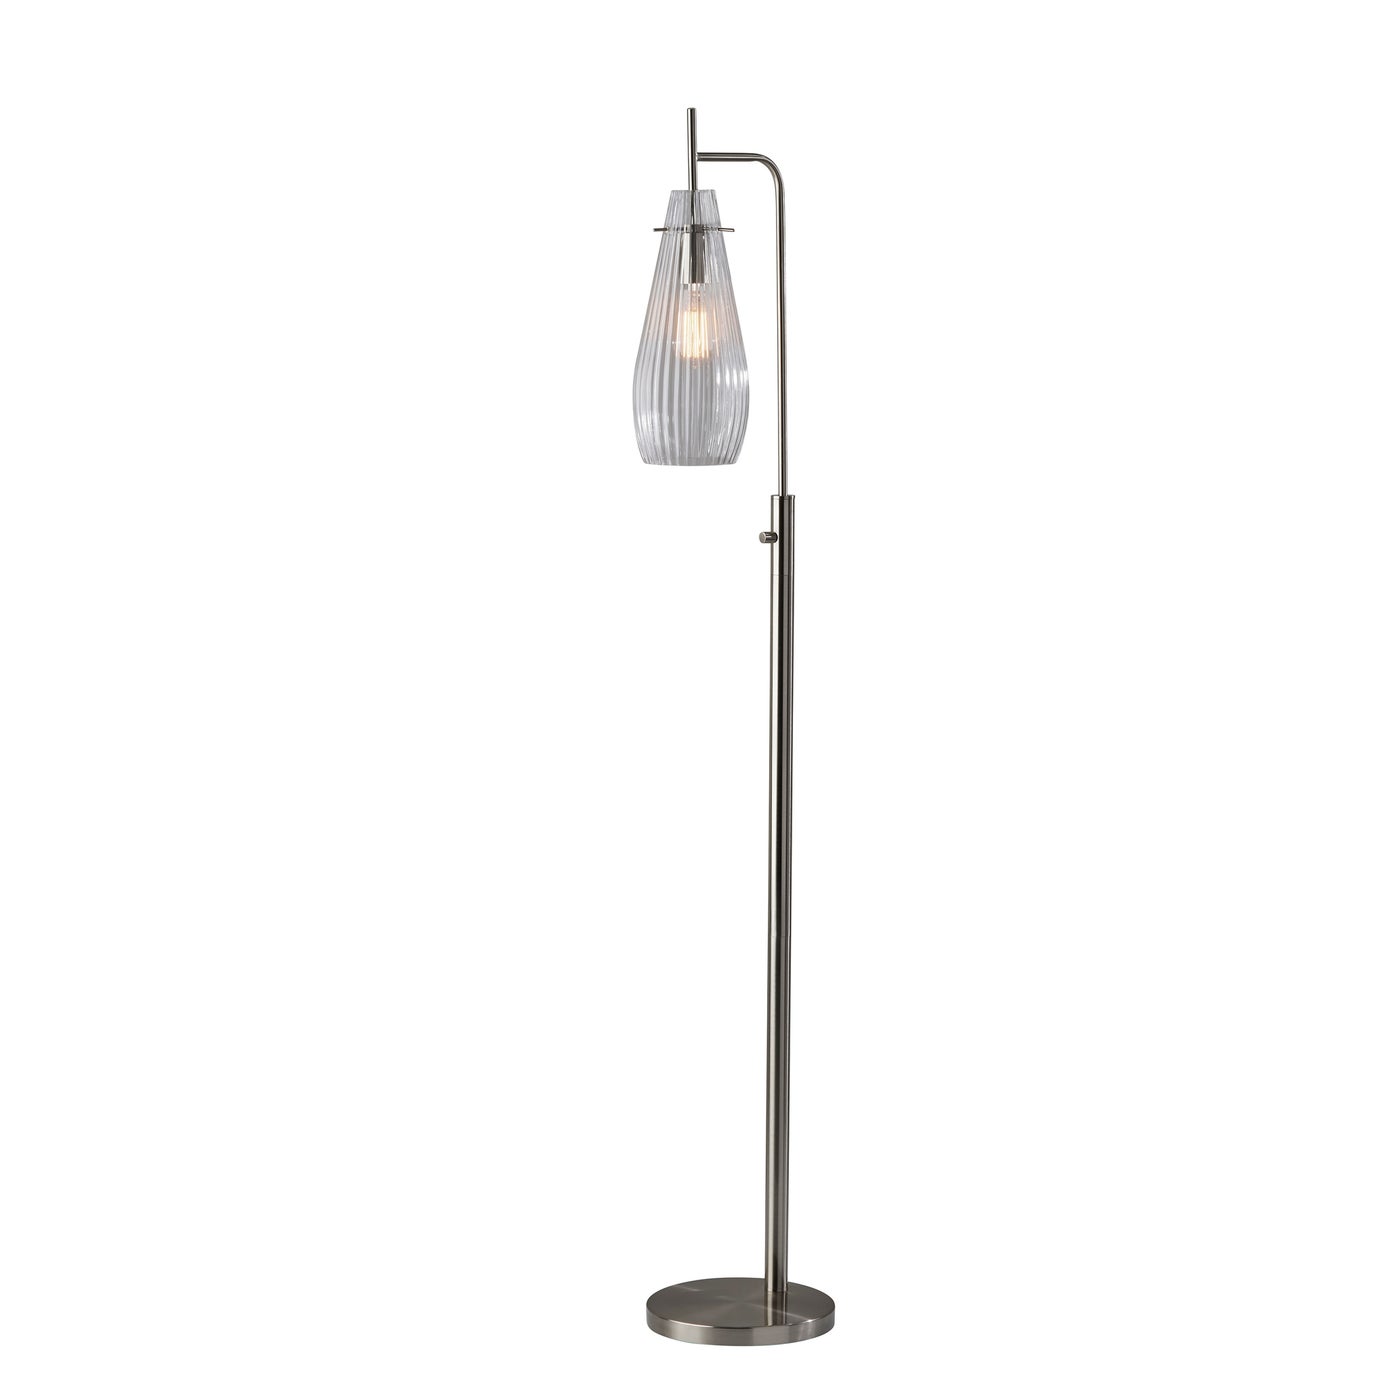 Adesso Home - 2148-22 - Floor Lamp - Layla - Brushed Steel